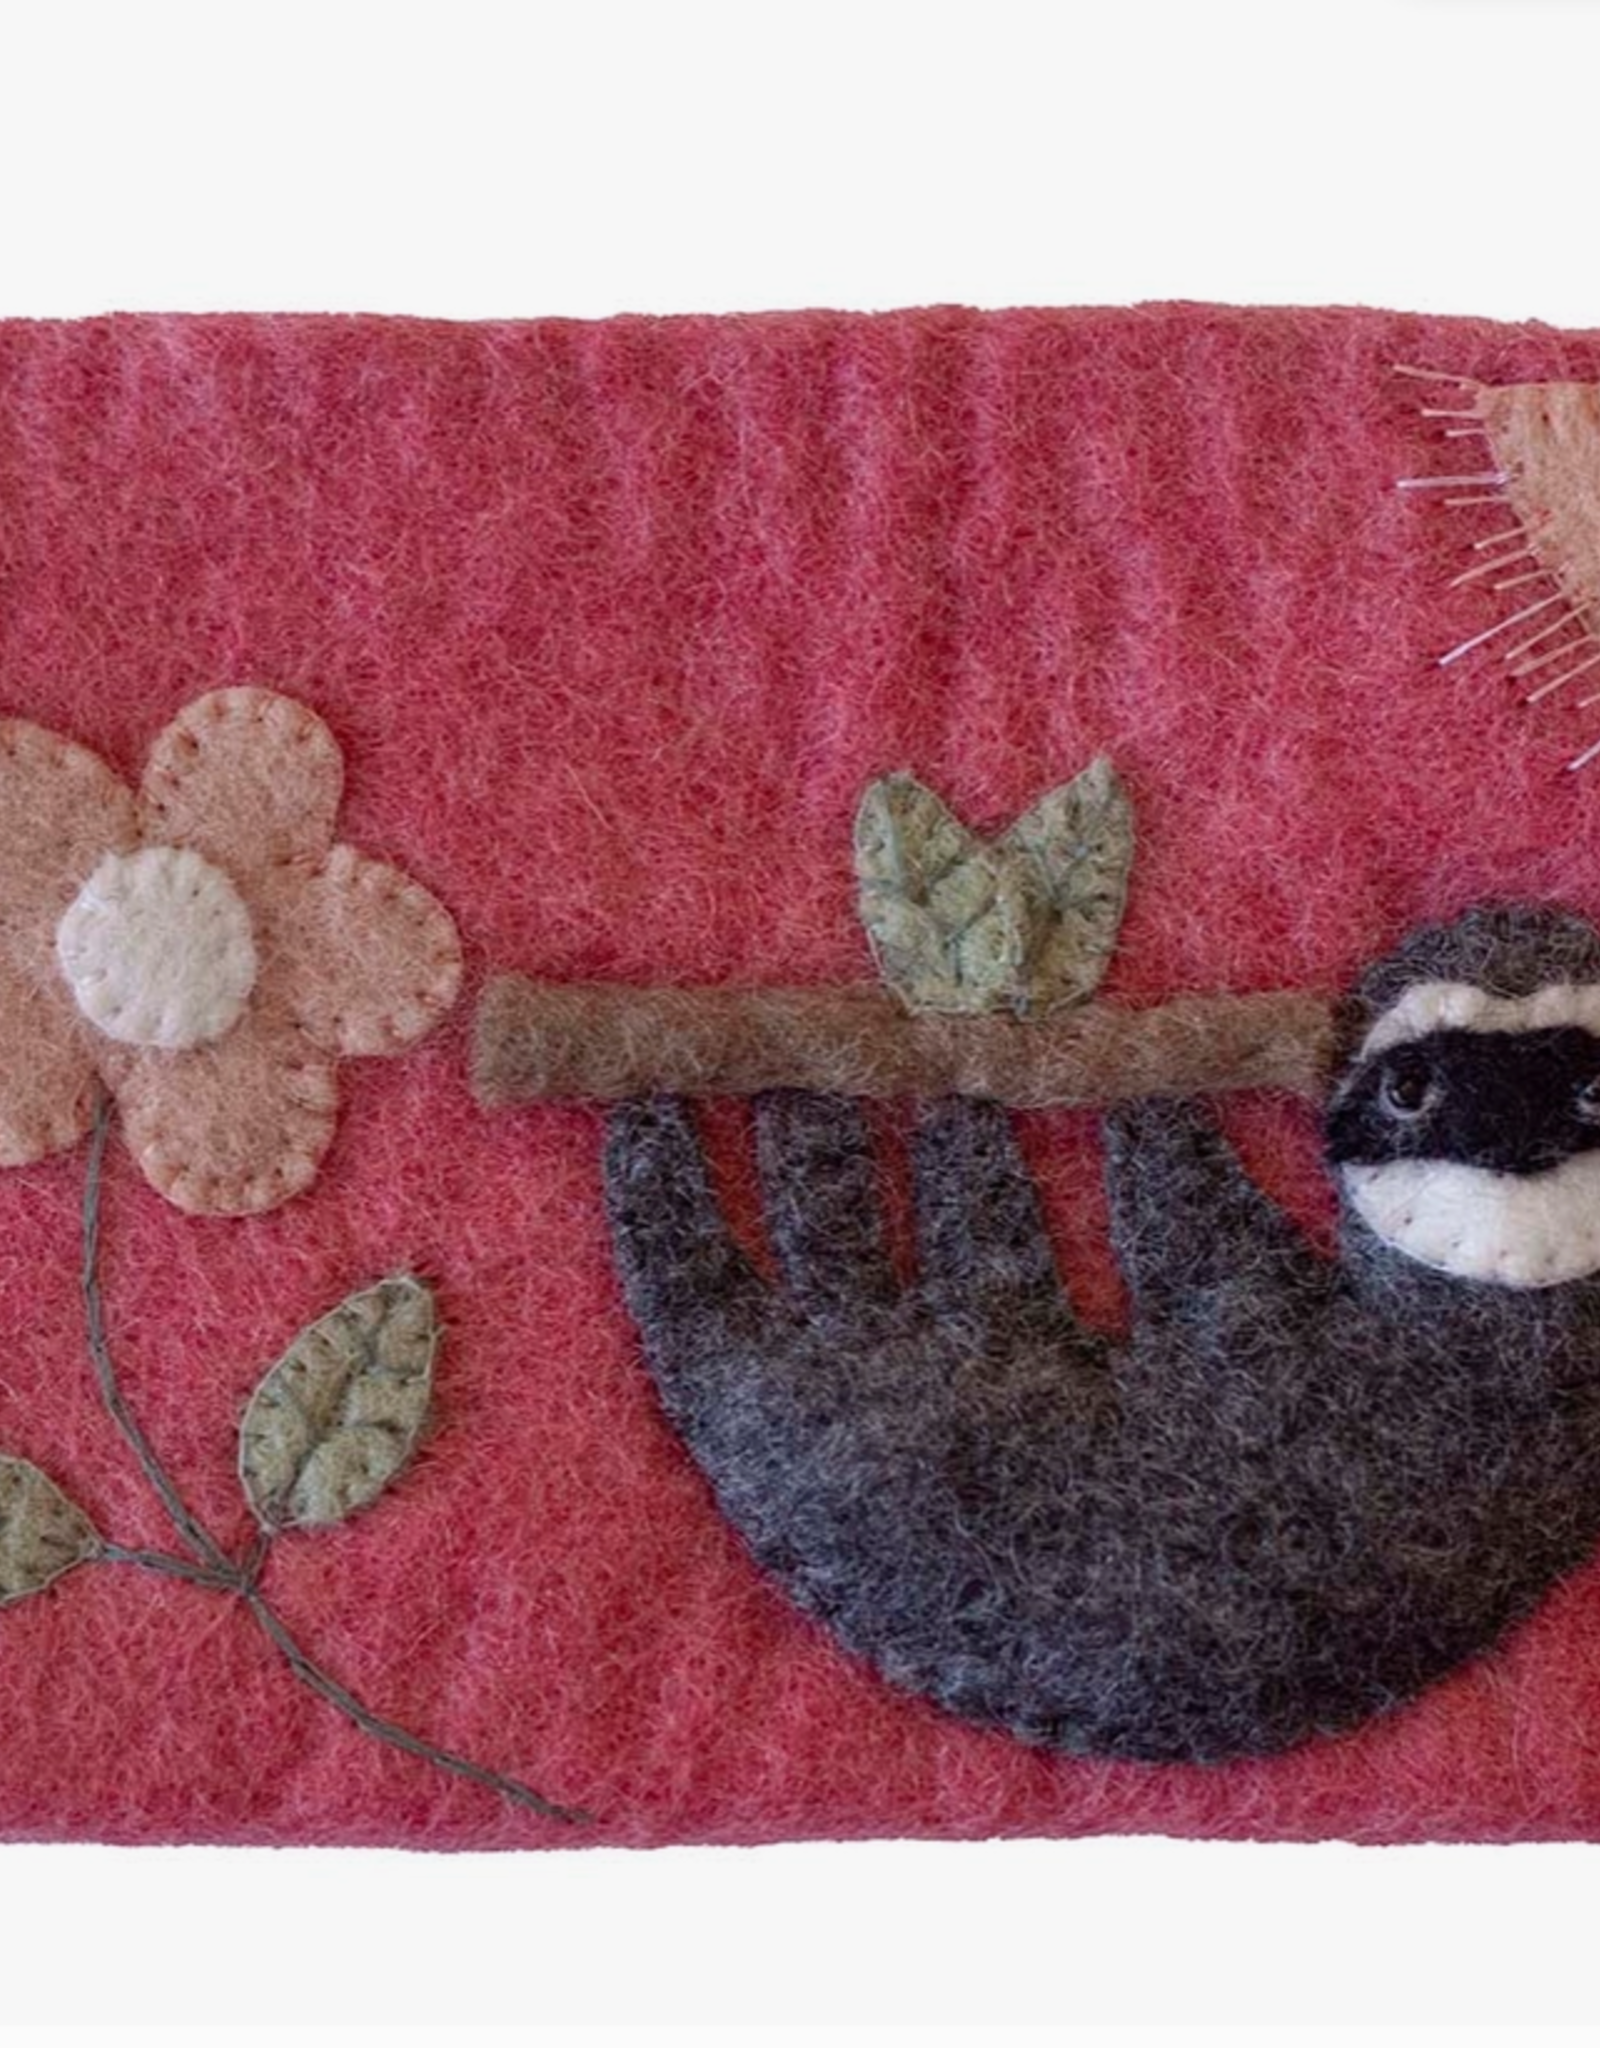 Global Crafts Felted Sloth Zipper Pouch